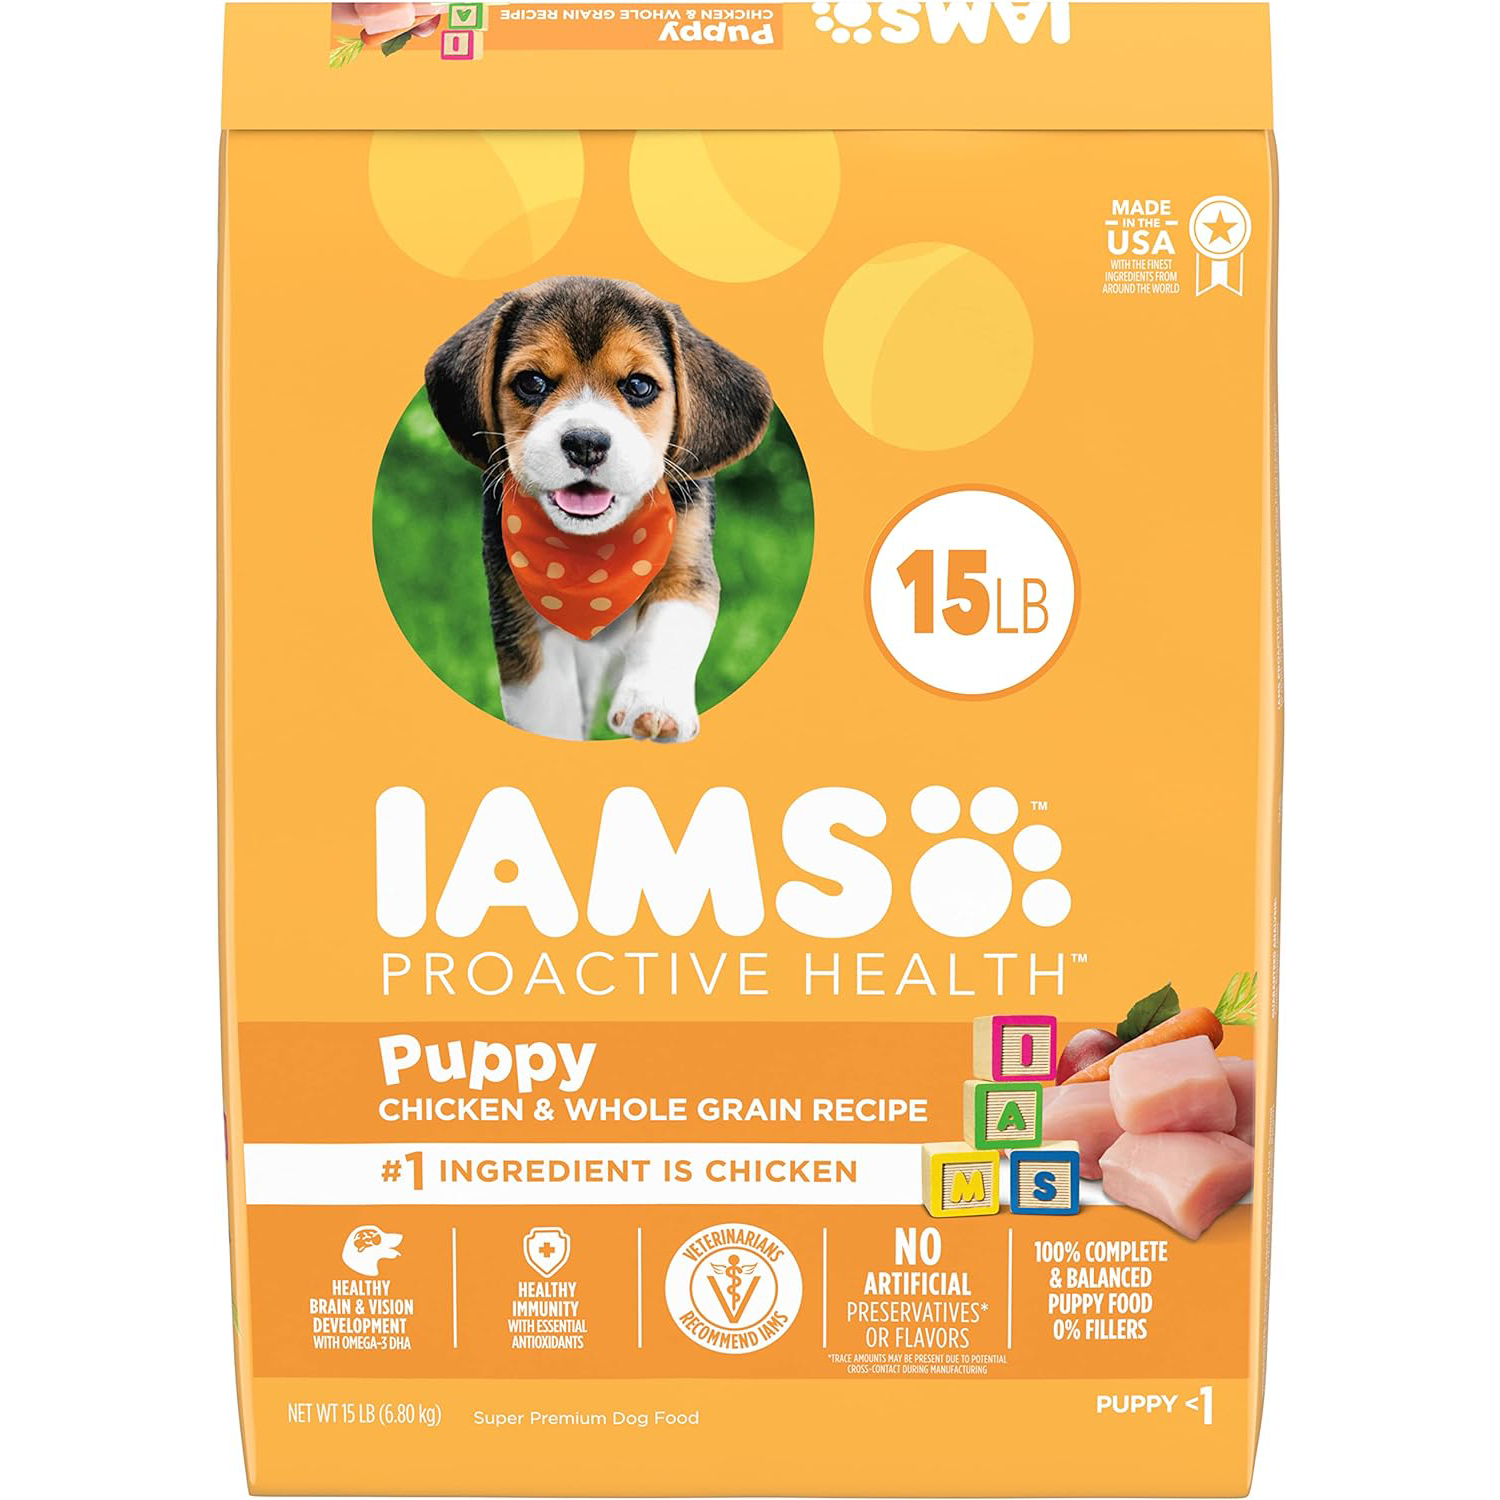 New Project IAMS Smart Puppy Dry Dog Food 